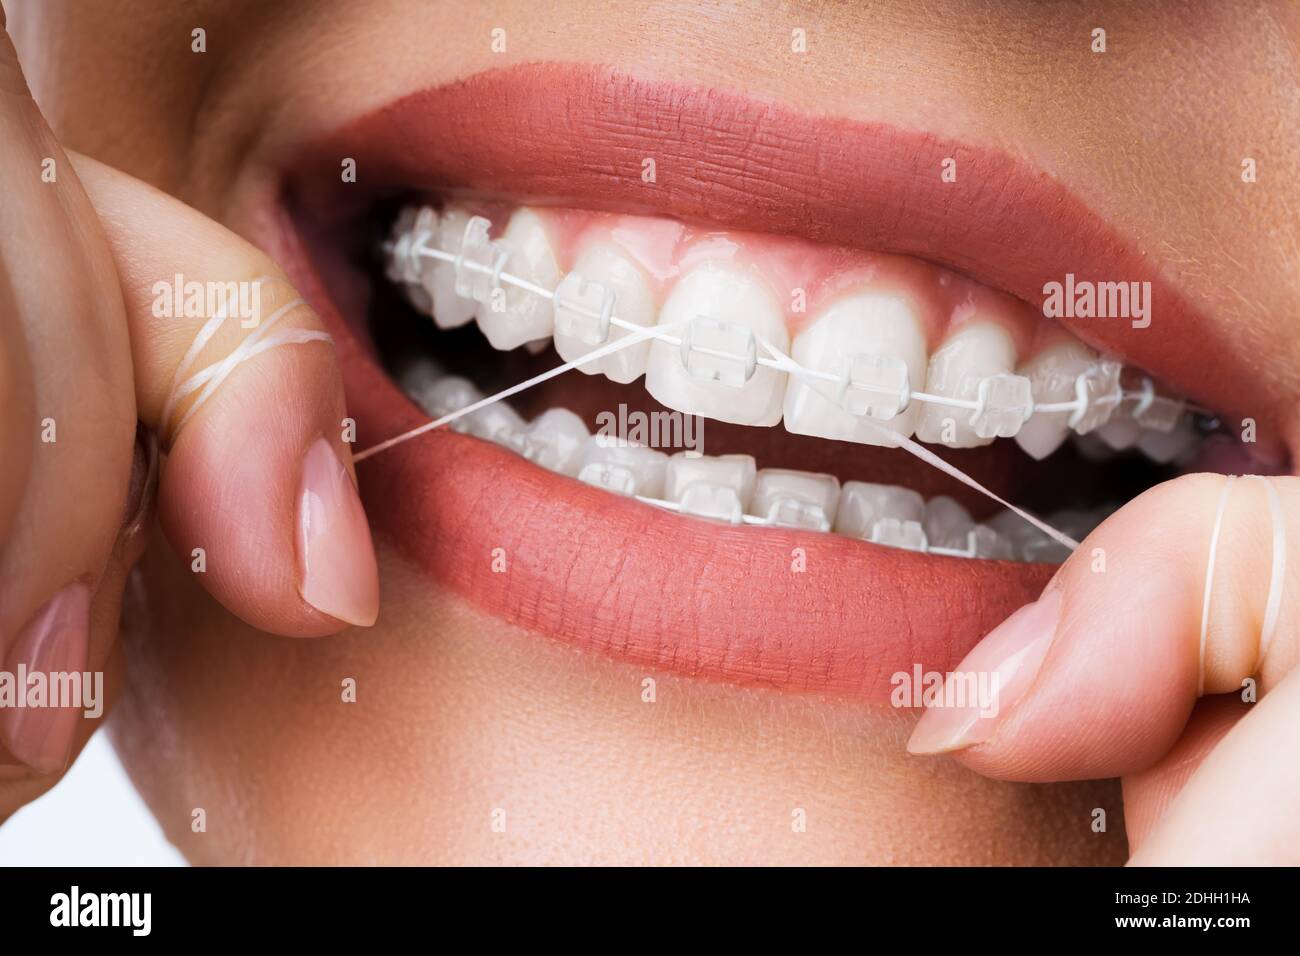 Female Cleaning Dental Brackets In Mouth Using Floss Stock Photo